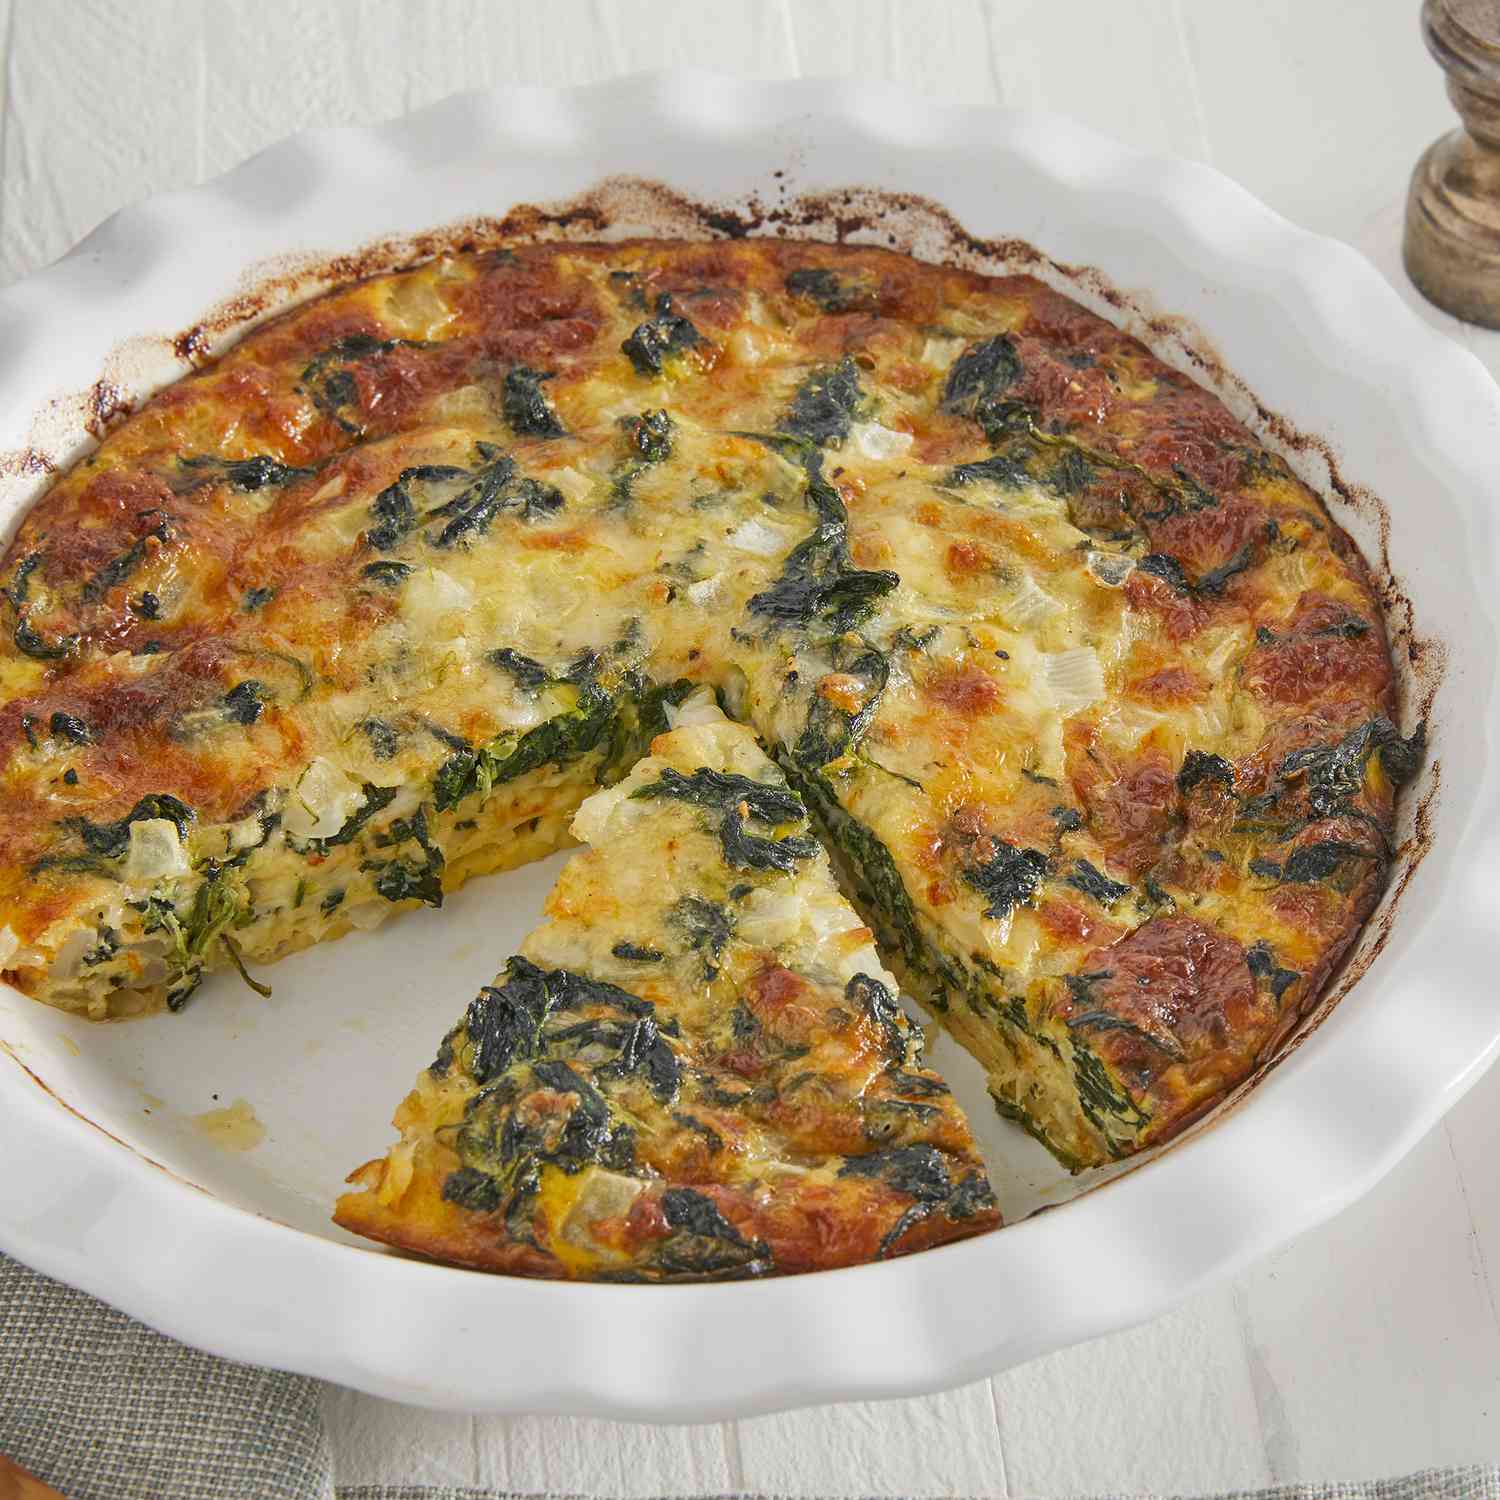 slightly less than overhead angle, looking into a casserole dish of a sliced spinach quiche and a slice off to the side